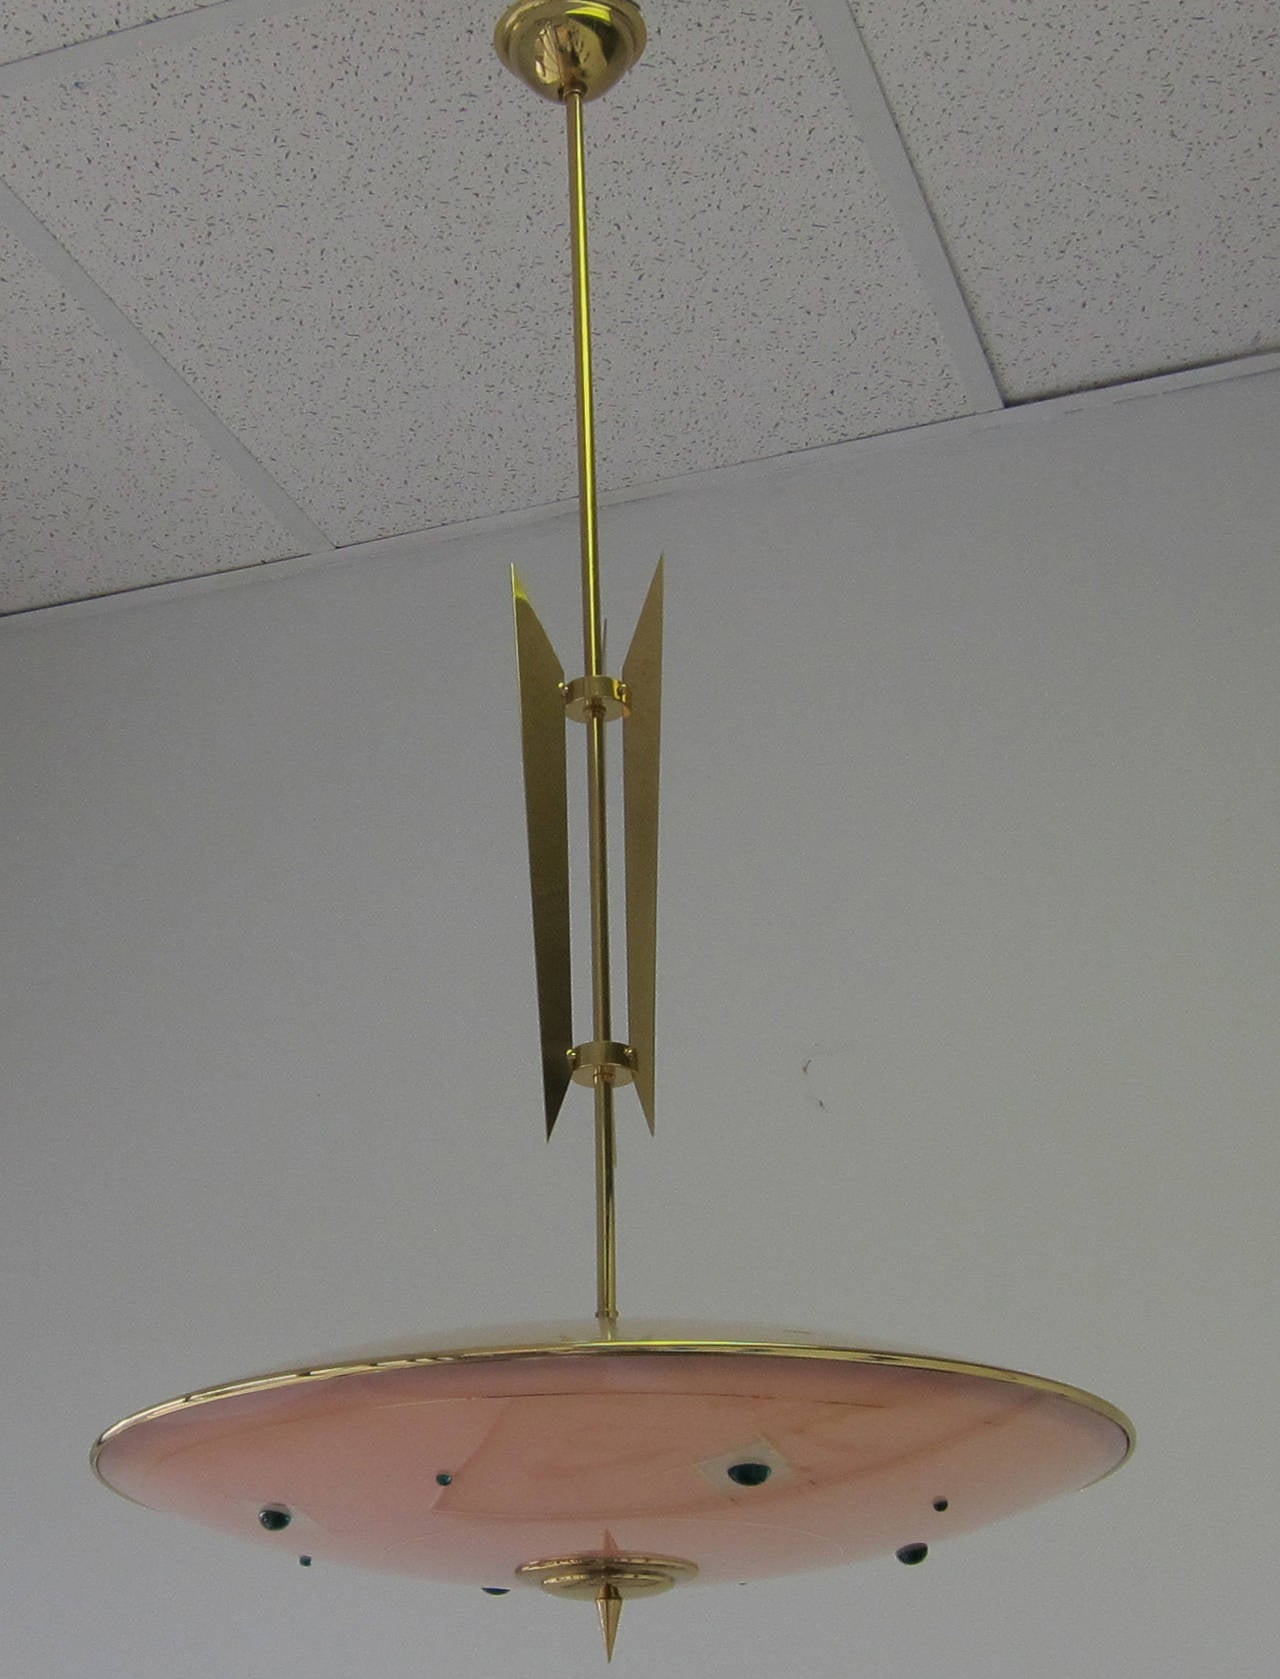 refined pendant lamp, Italy, circa 1950s. Diffuser in pink curved glass decorated with emerald green cabochon and brass accents. Newly restored and wired to perfection. A gem!